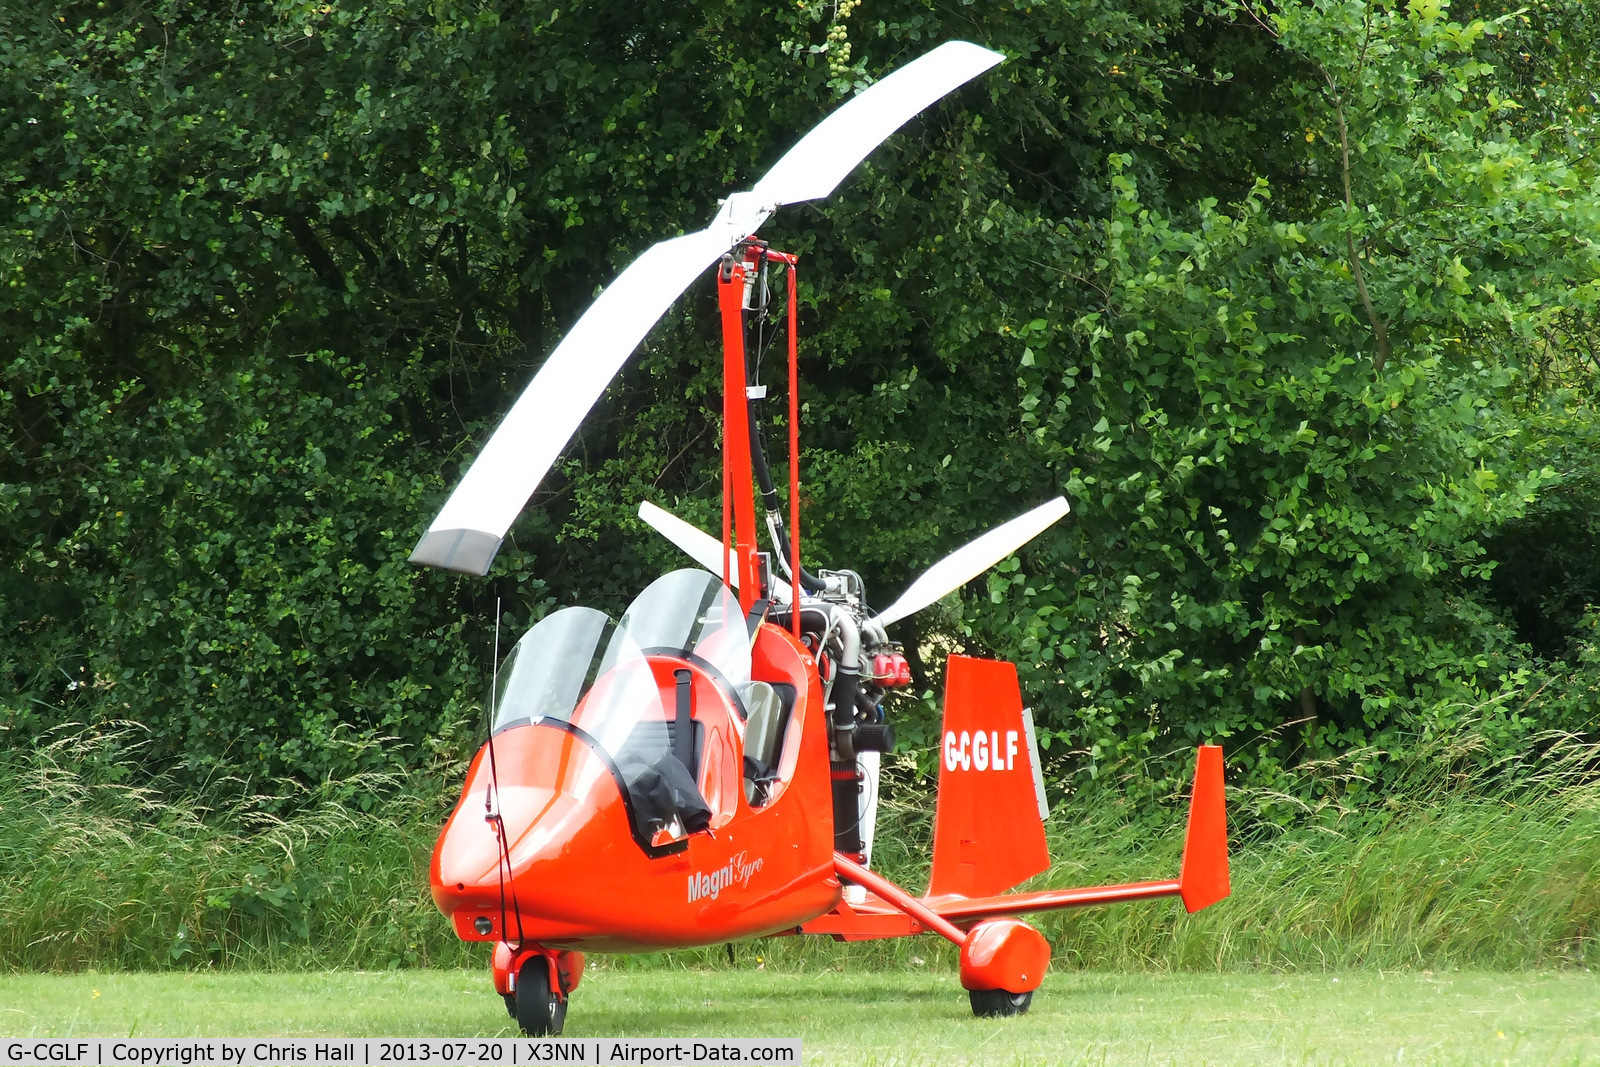 G-CGLF, 2009 Magni Gyro M-16C Tandem Trainer C/N 16-09-5614, at the Stoke Golding stakeout 2013